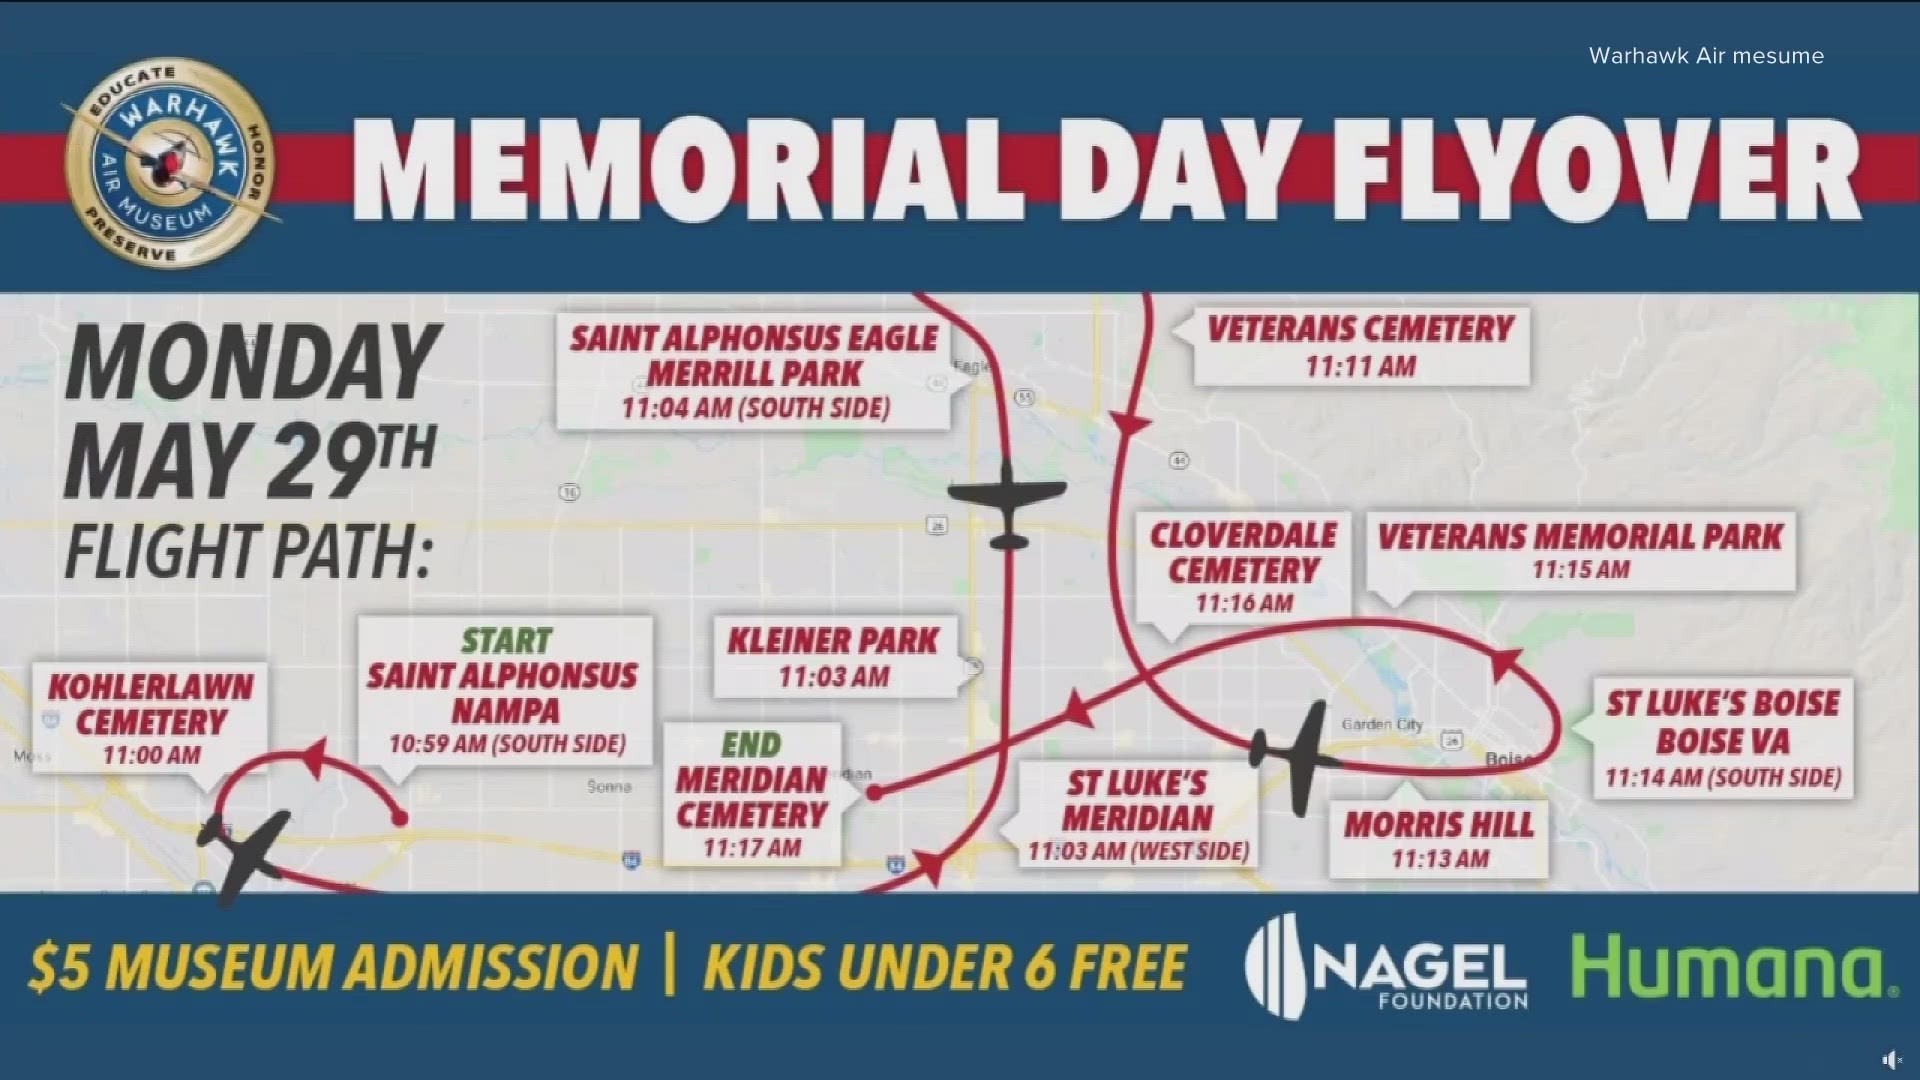 With Memorial Day fast approaching, there is a number of events taking place in the Treasure Valley on Monday to honor those who have died while serving the U.S.